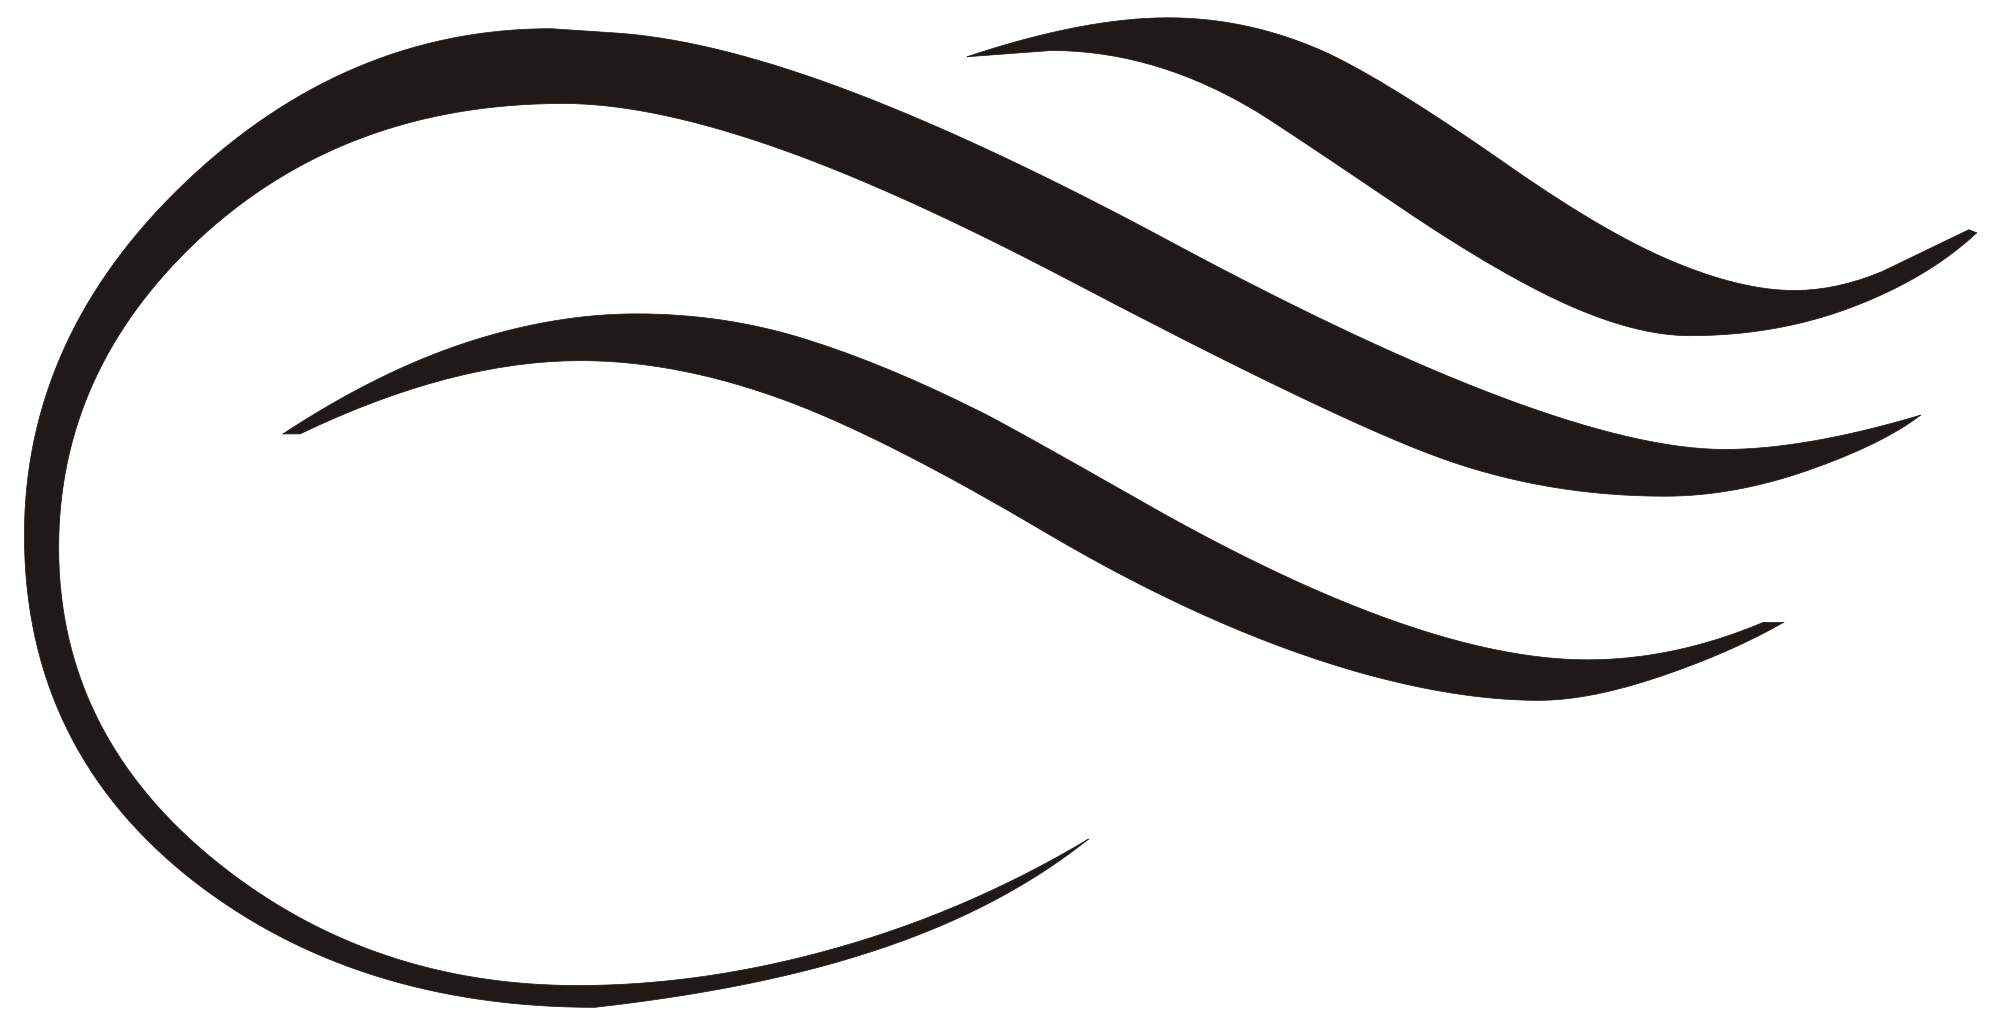 Free Curved Lines Png, Download Free Curved Lines Png png images, Free